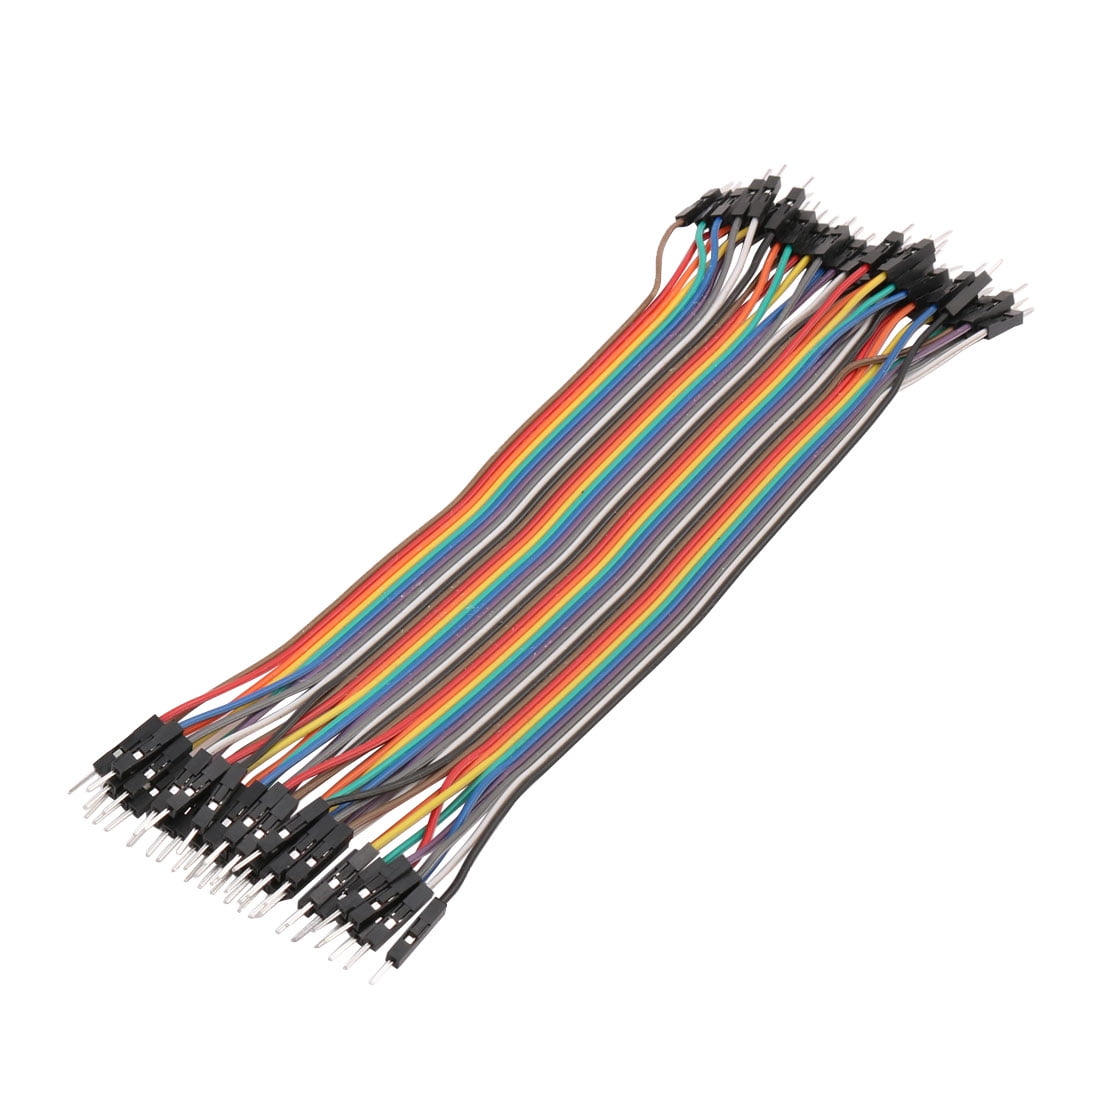 40pcs 10CM Dupont Wire Male to Female Breadboard Jumper Wires Ribbon Cable USA 